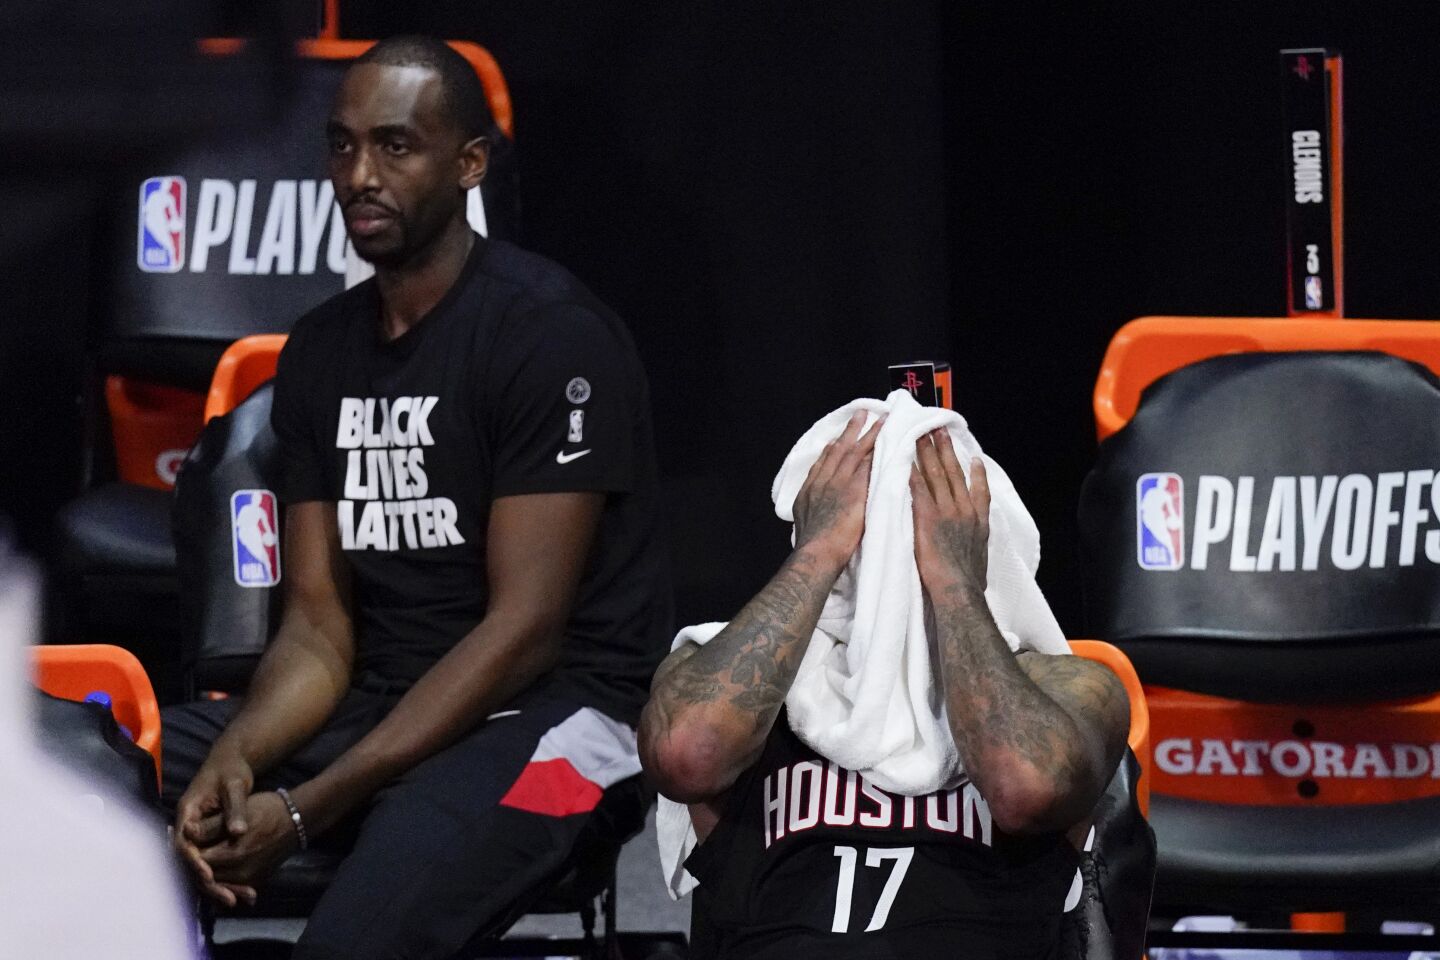 Houston's P.J. Tucker puts a towel over his face next to Luc Mbah a Moute during the second half.